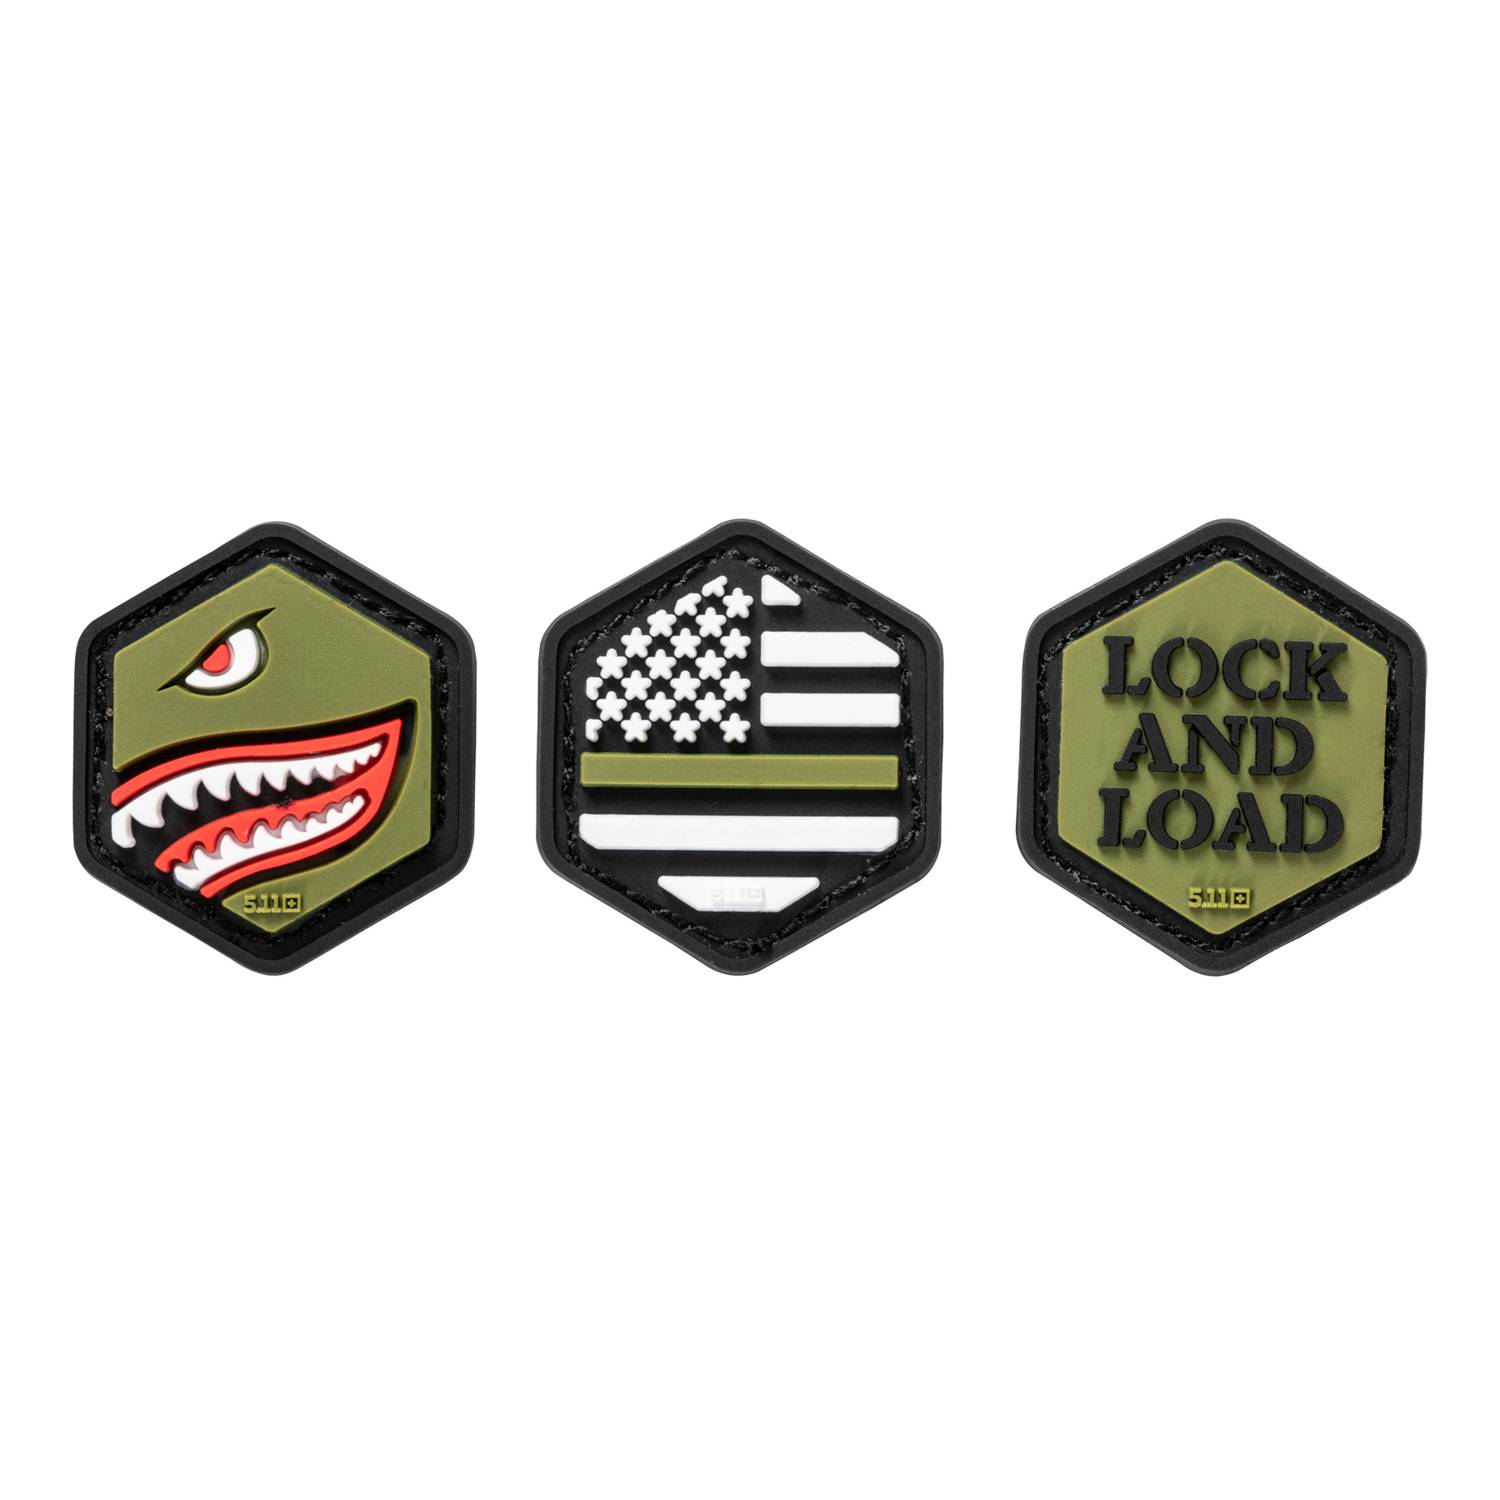 5.11 Hex Patch Armed Forces Set